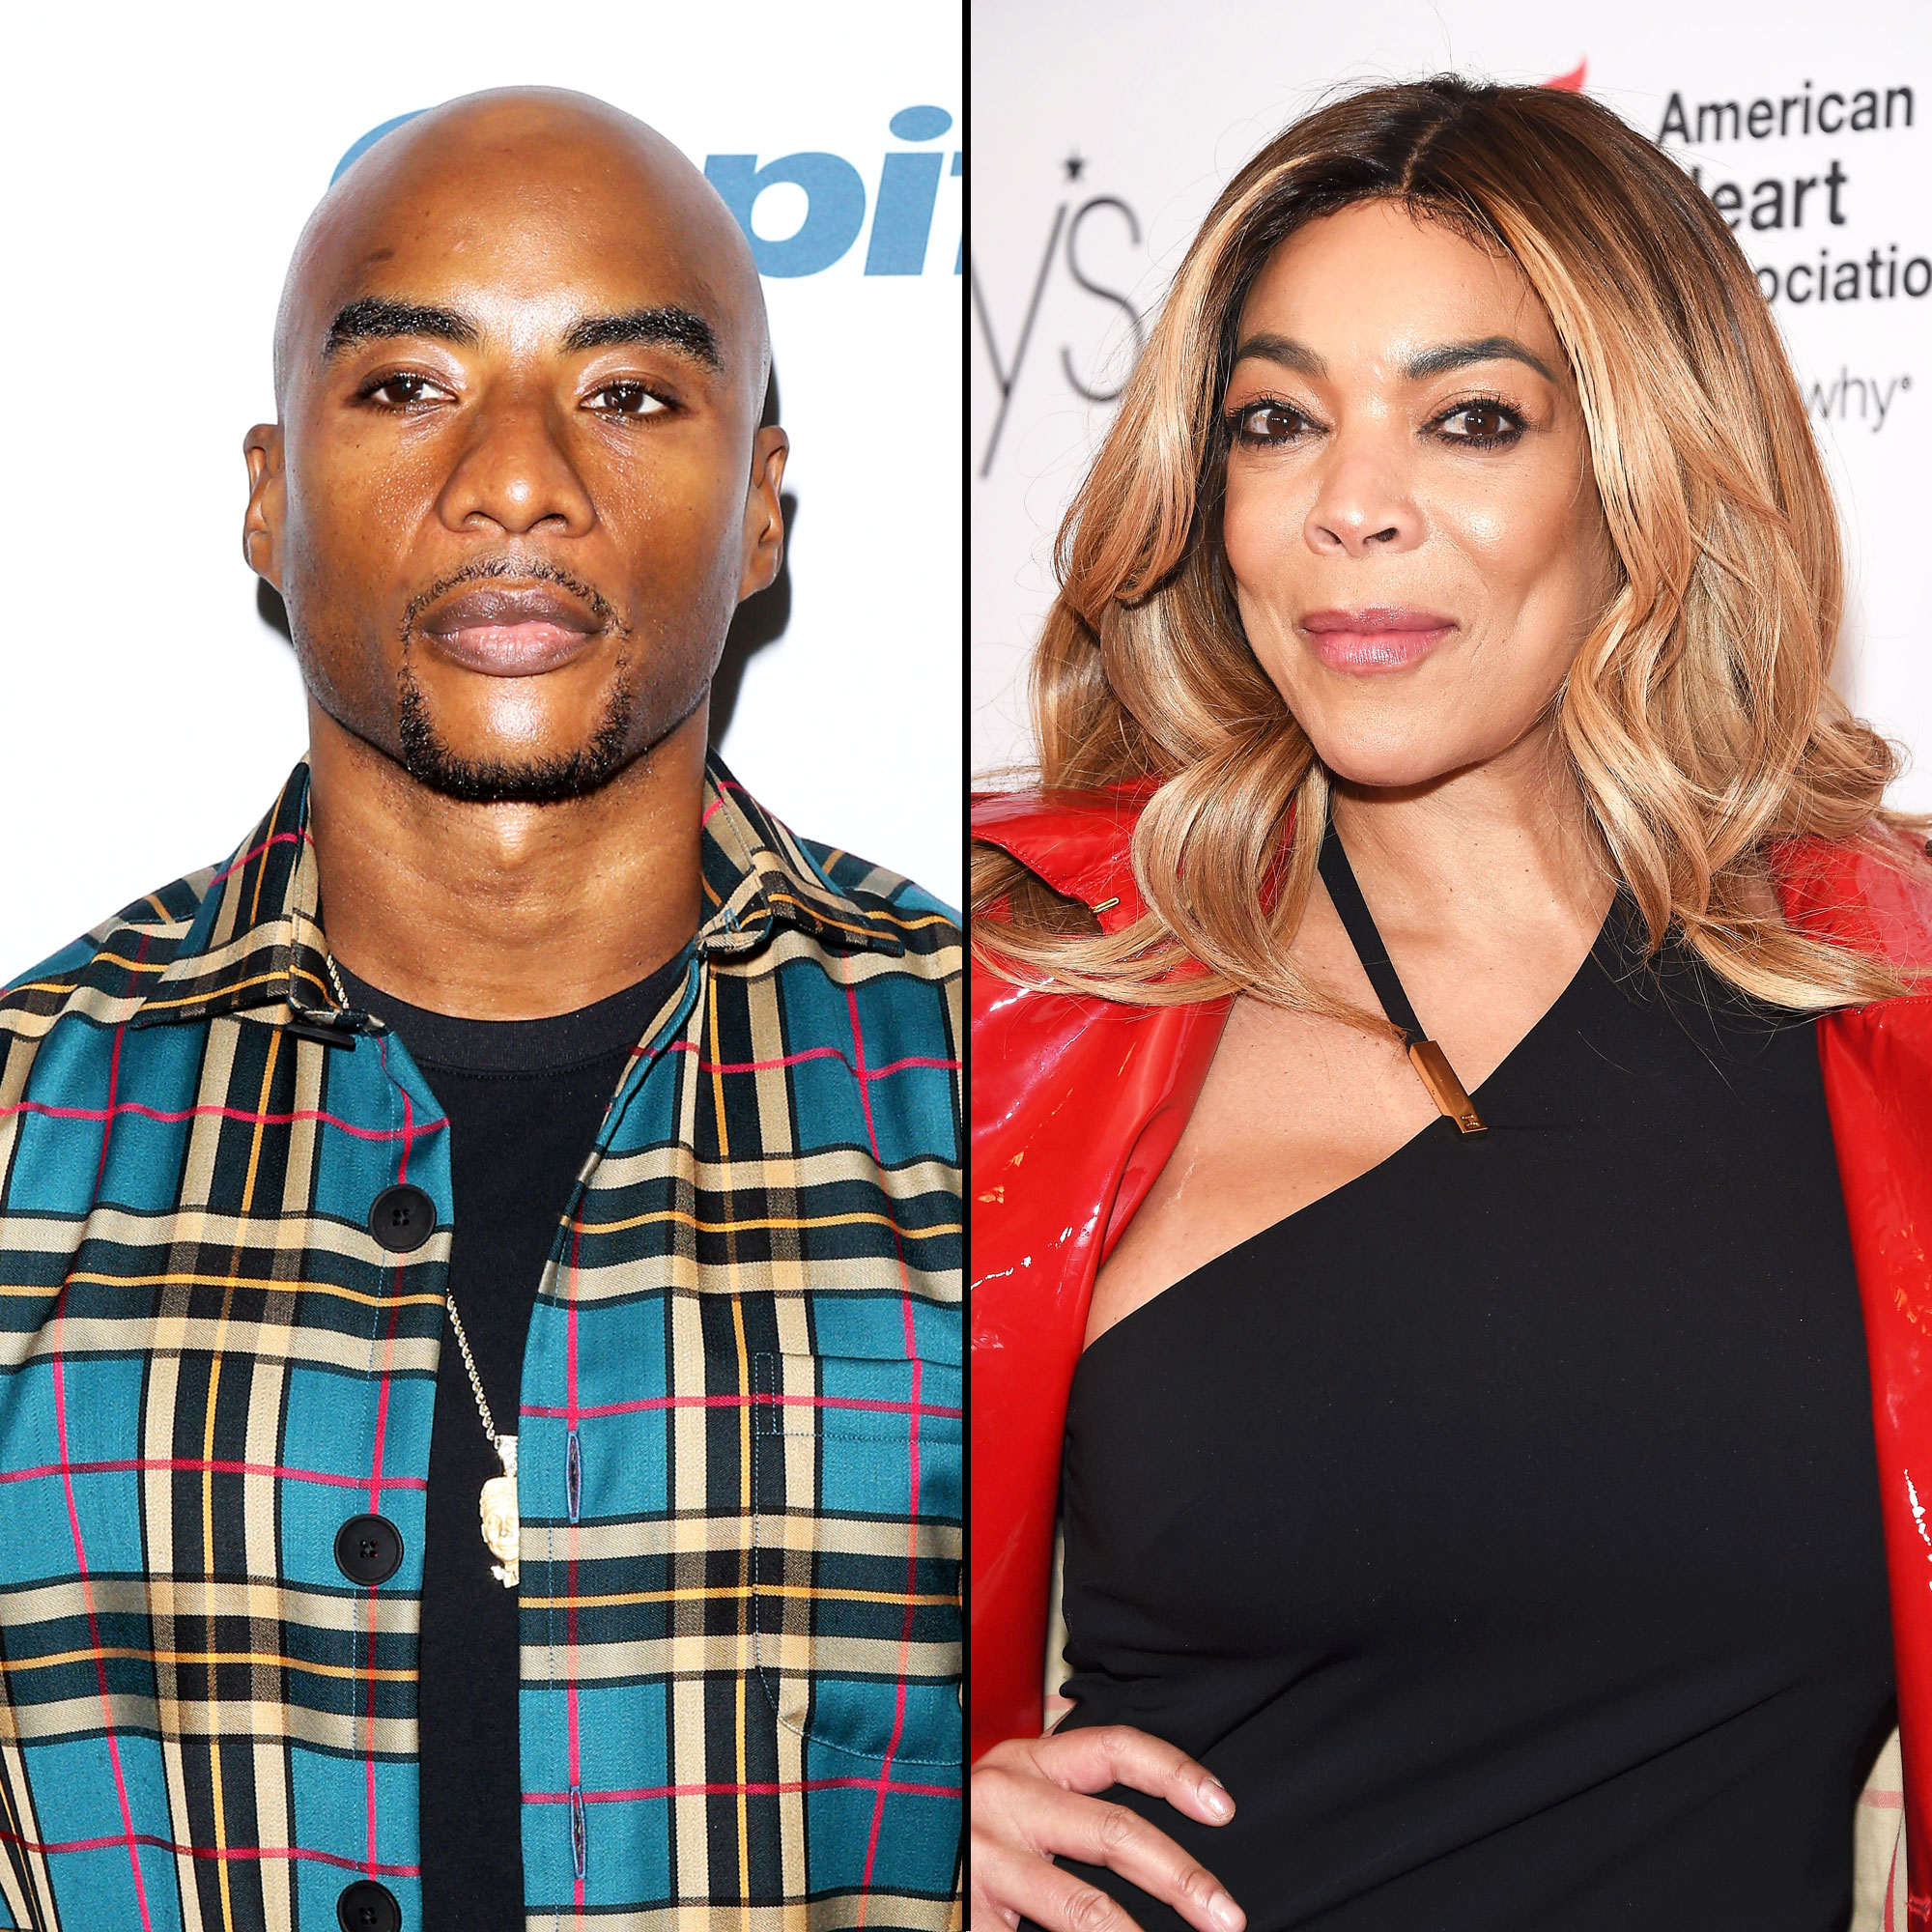 Charlamagne Tha God Says Wendy Williams Was Abused in Marriage image pic